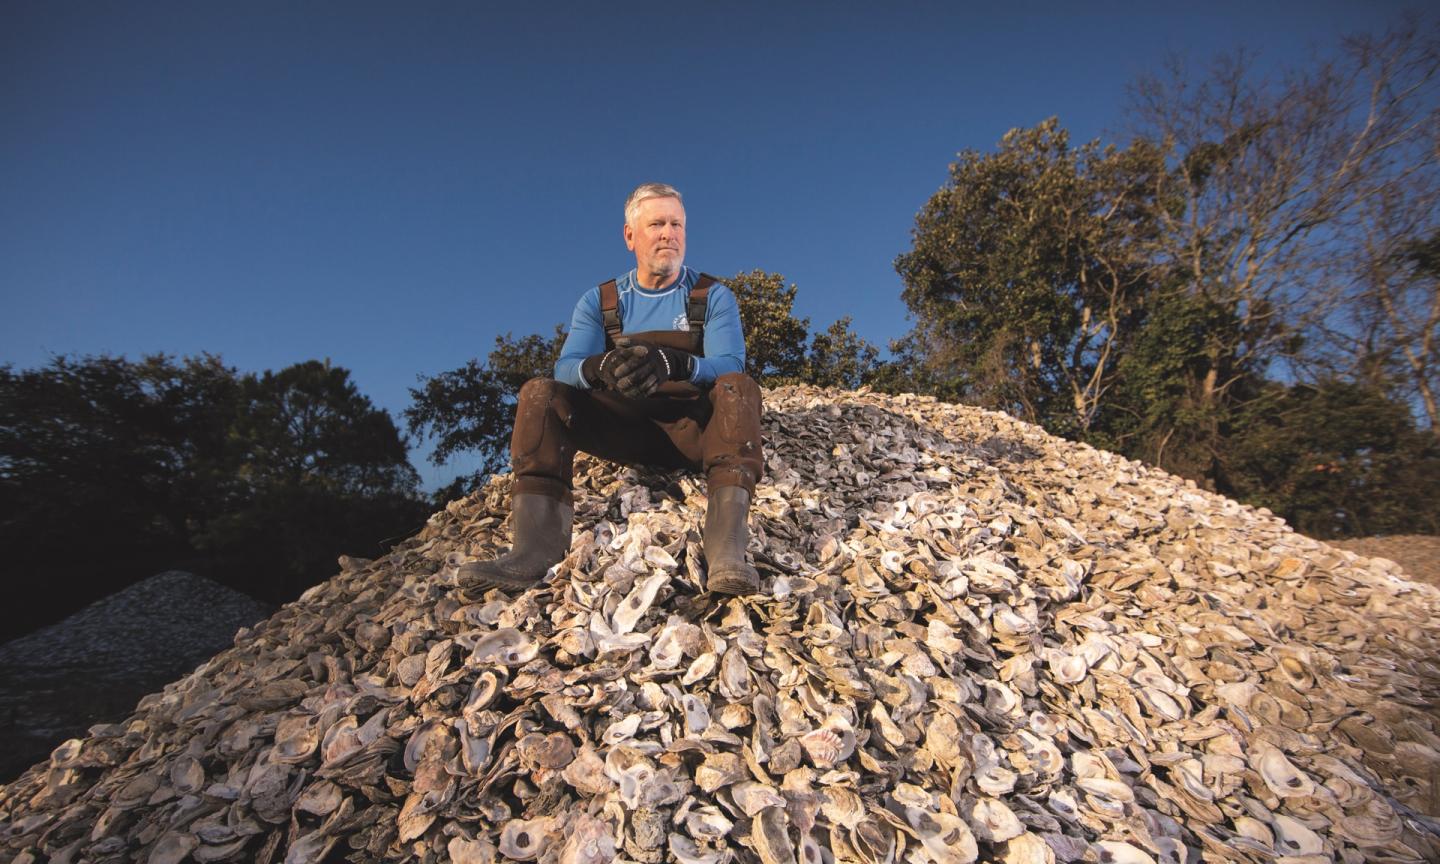 Duke Aquafarm founder Tom Schultz, an expert in marine molecular conservation, is working to understand climate’s impact on seafood such as oysters.